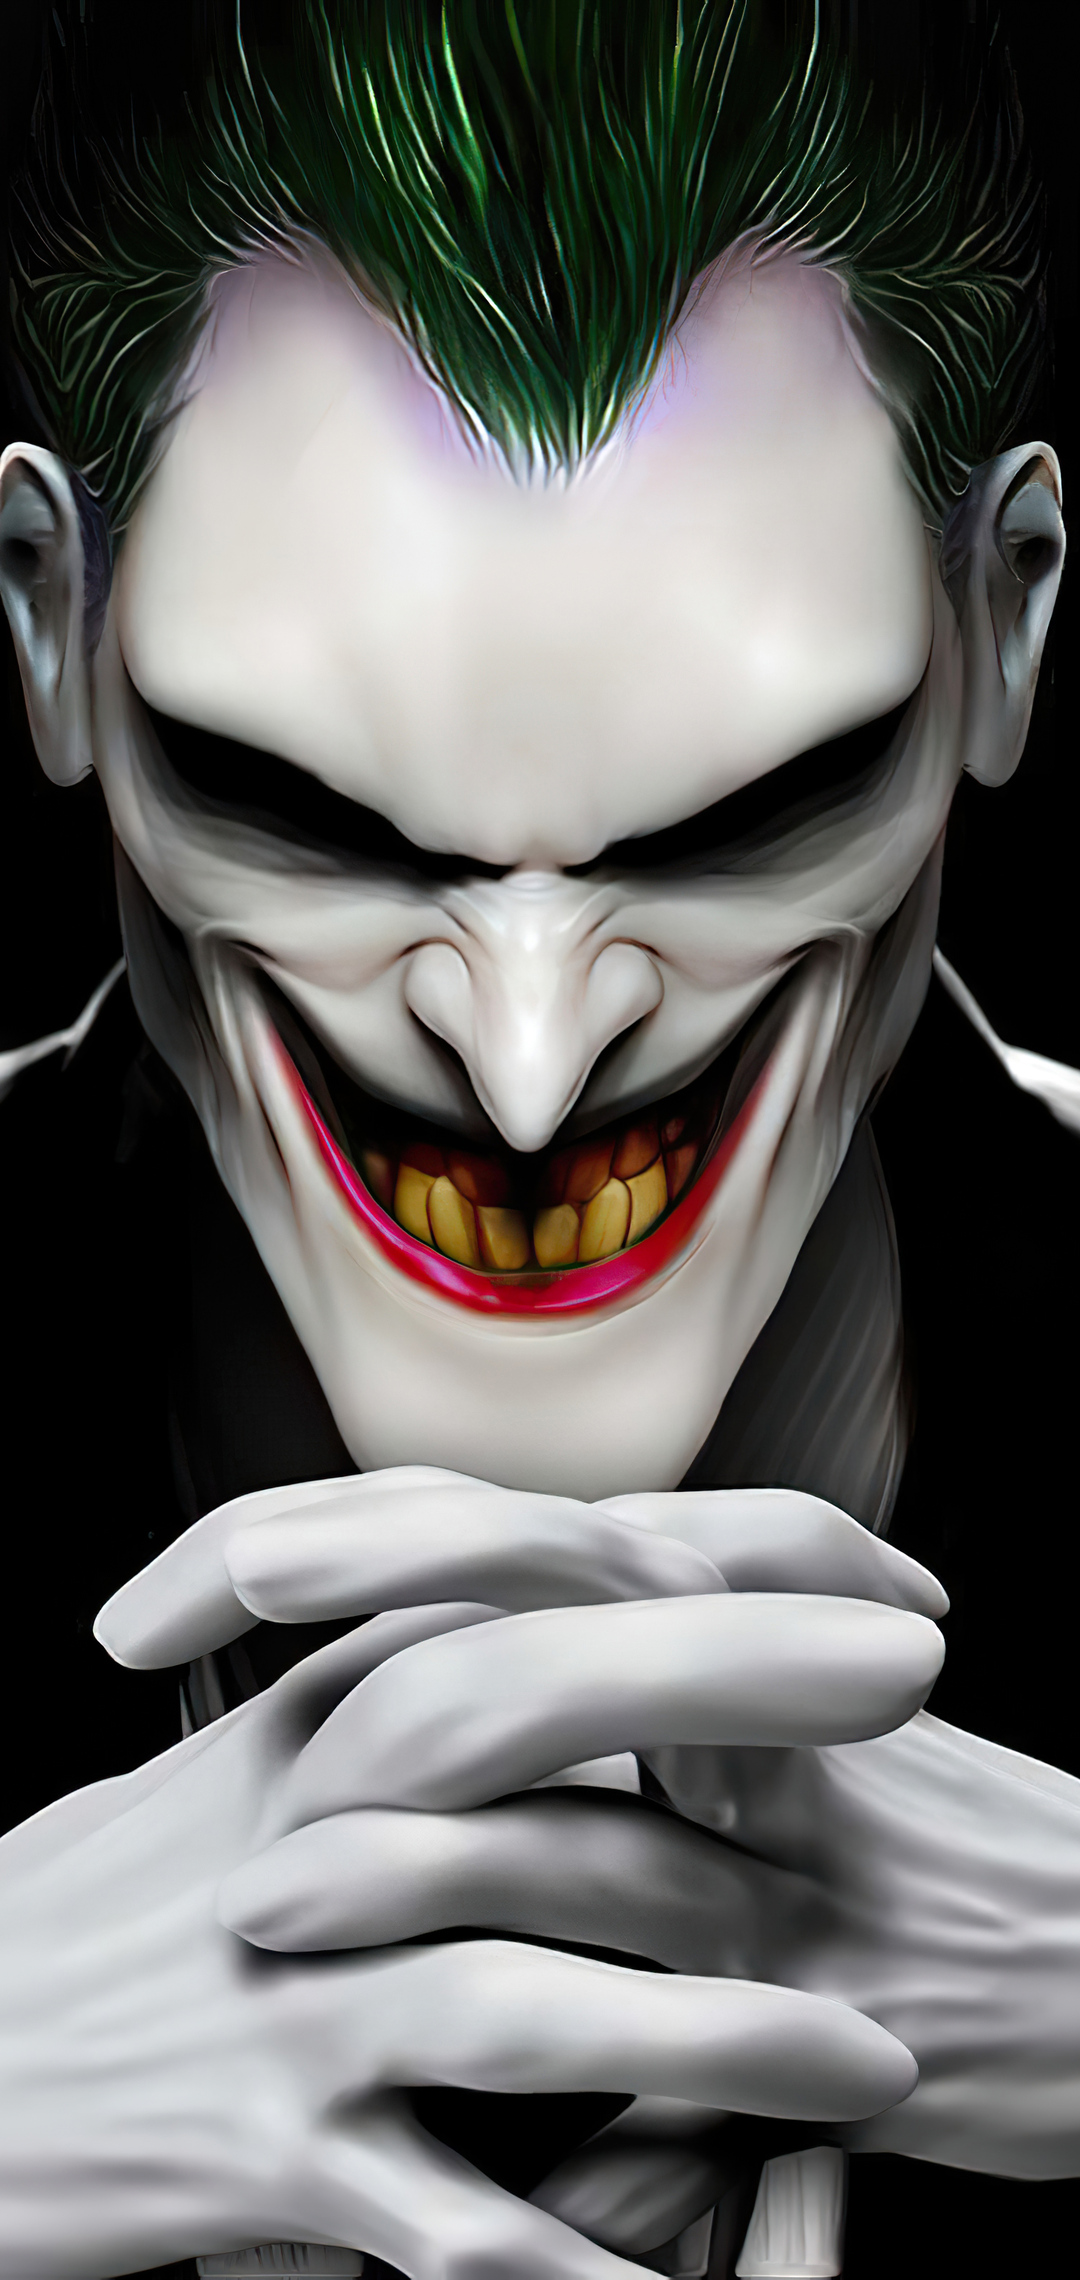 1080x2280 Joker Danger Smile Artwork One Plus 6,Huawei p20,Honor view  10,Vivo y85,Oppo f7,Xiaomi Mi A2 HD 4k Wallpapers, Images, Backgrounds,  Photos and Pictures